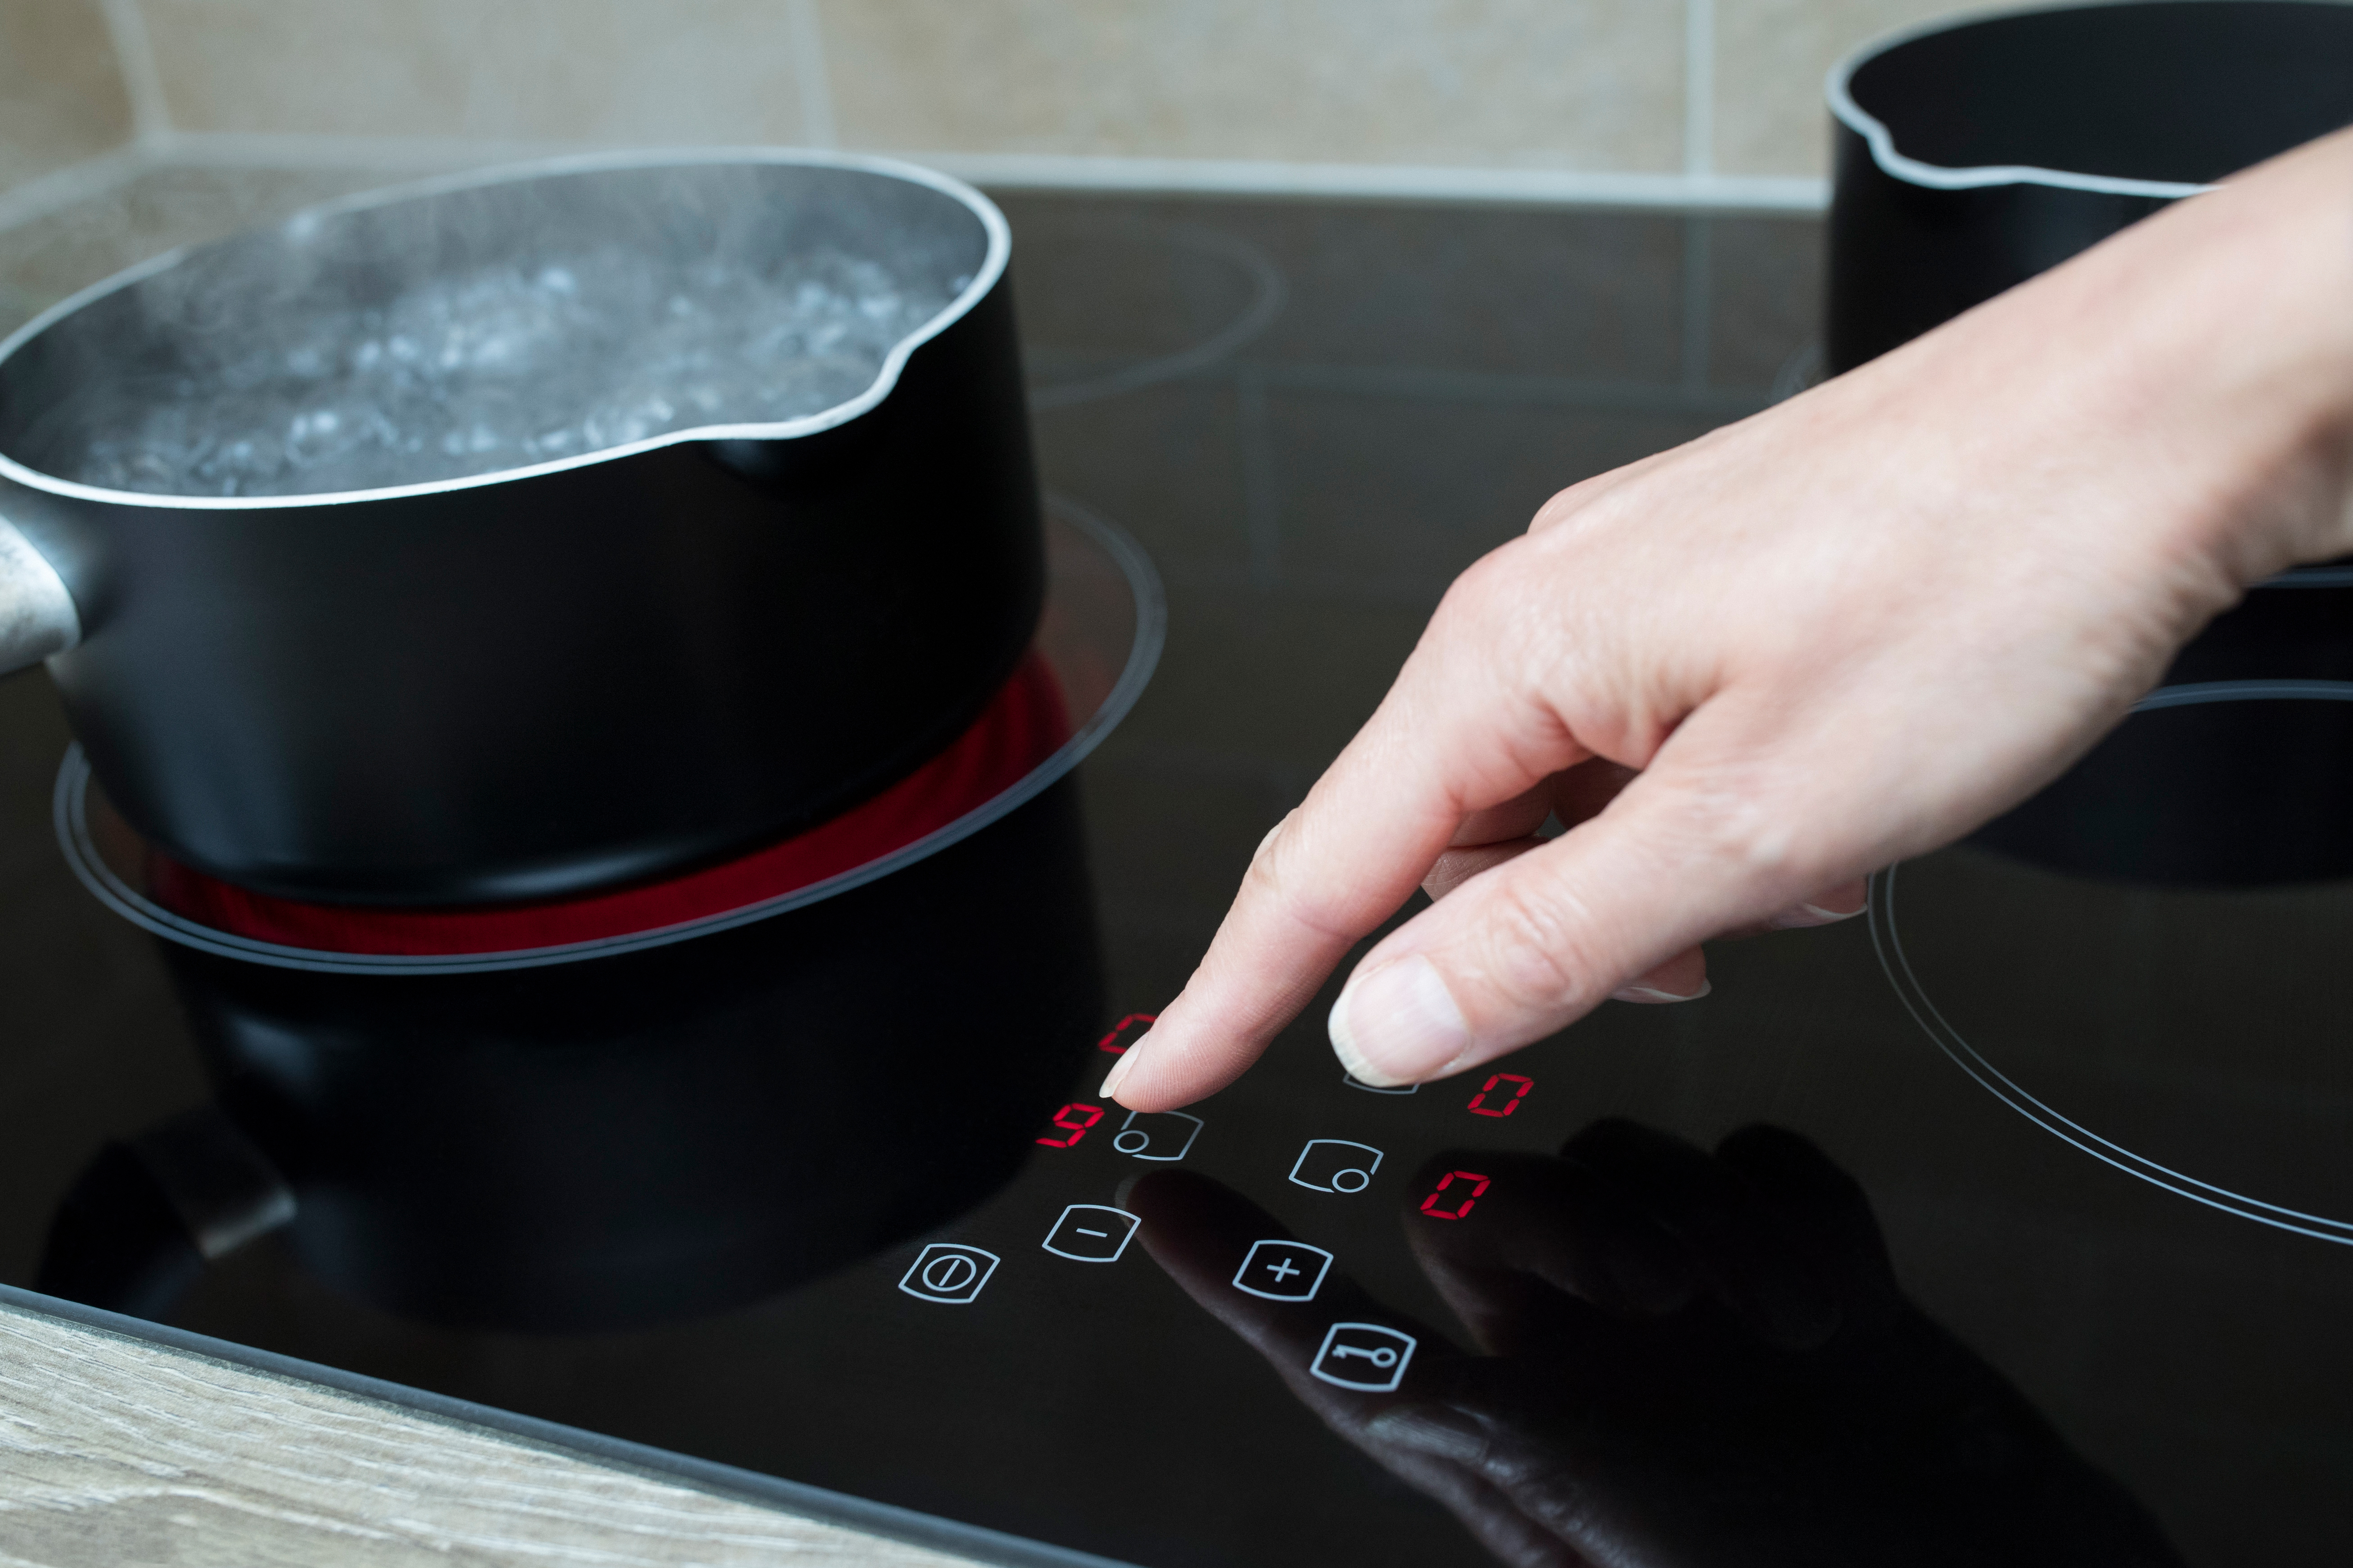 How to Clean a Glass Top Stove or Ceramic Cooktop